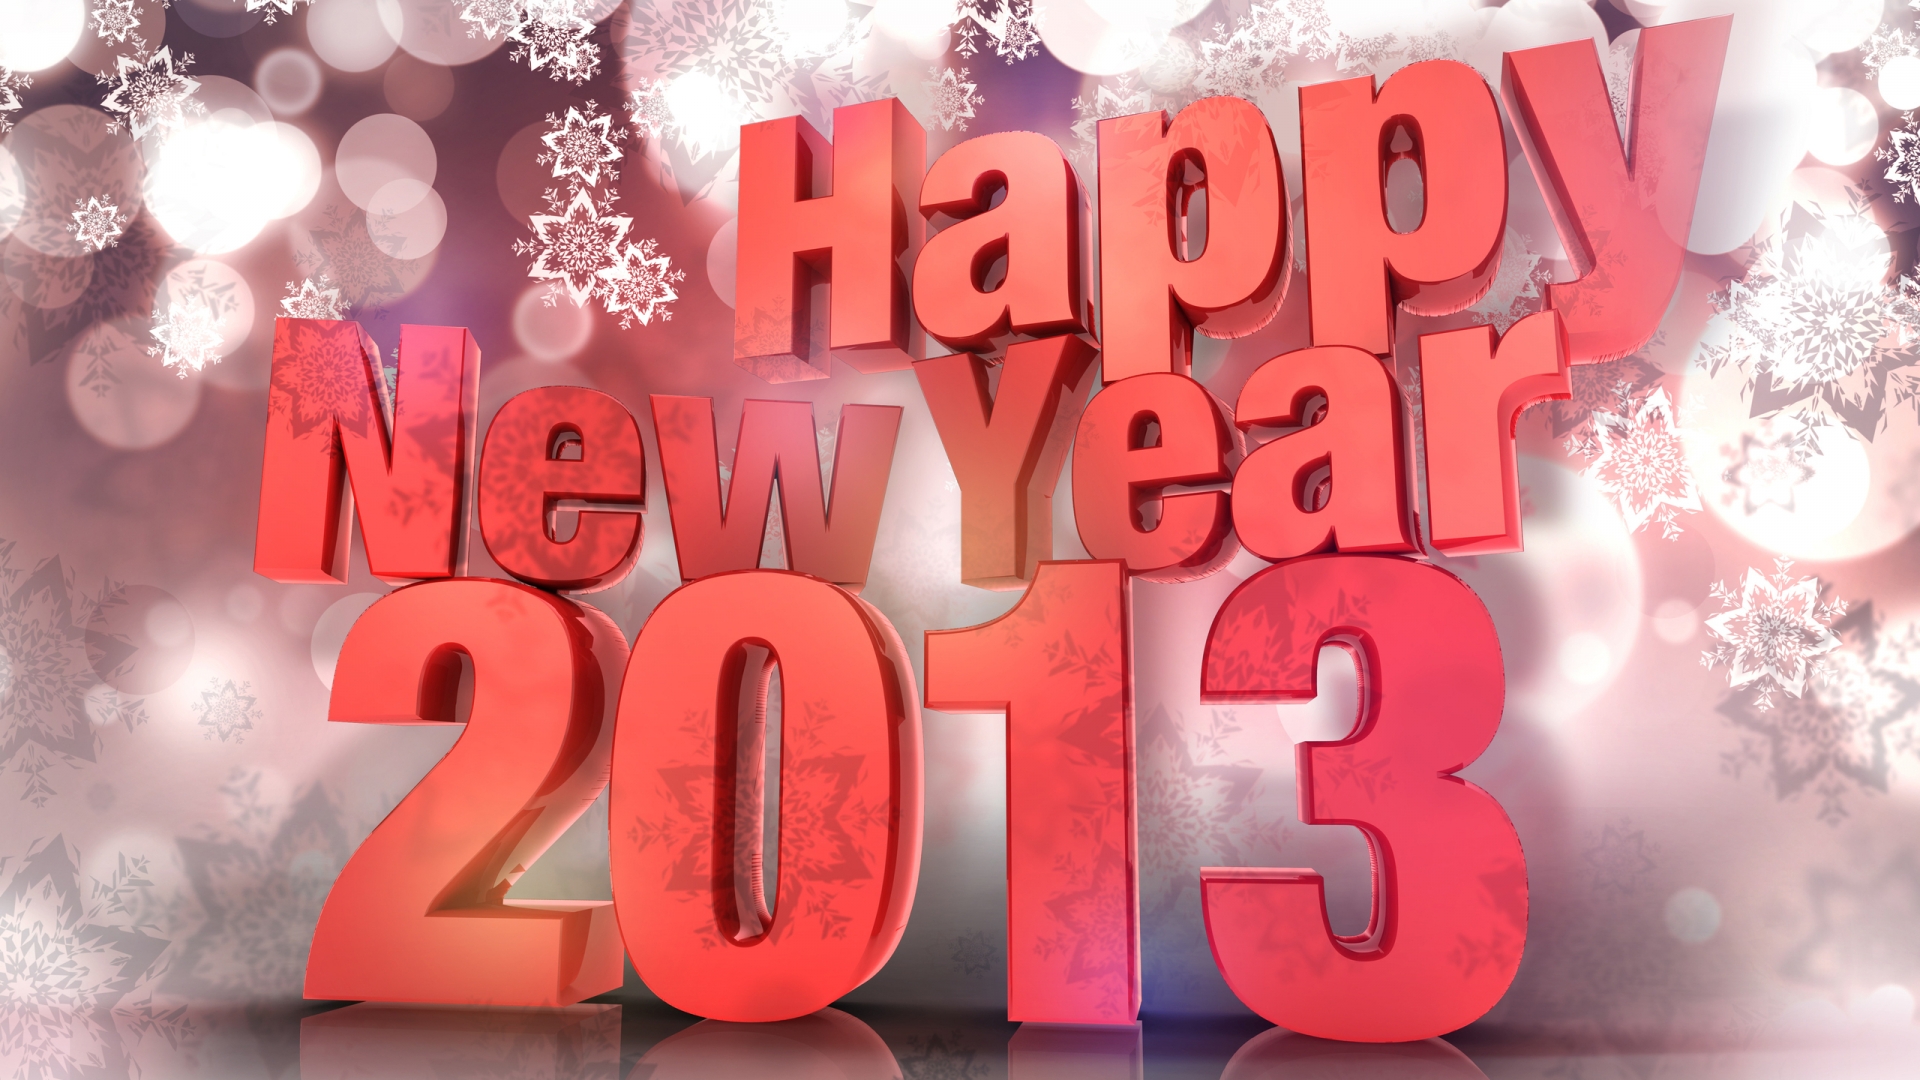 Happy New 2013 for 1920 x 1080 HDTV 1080p resolution